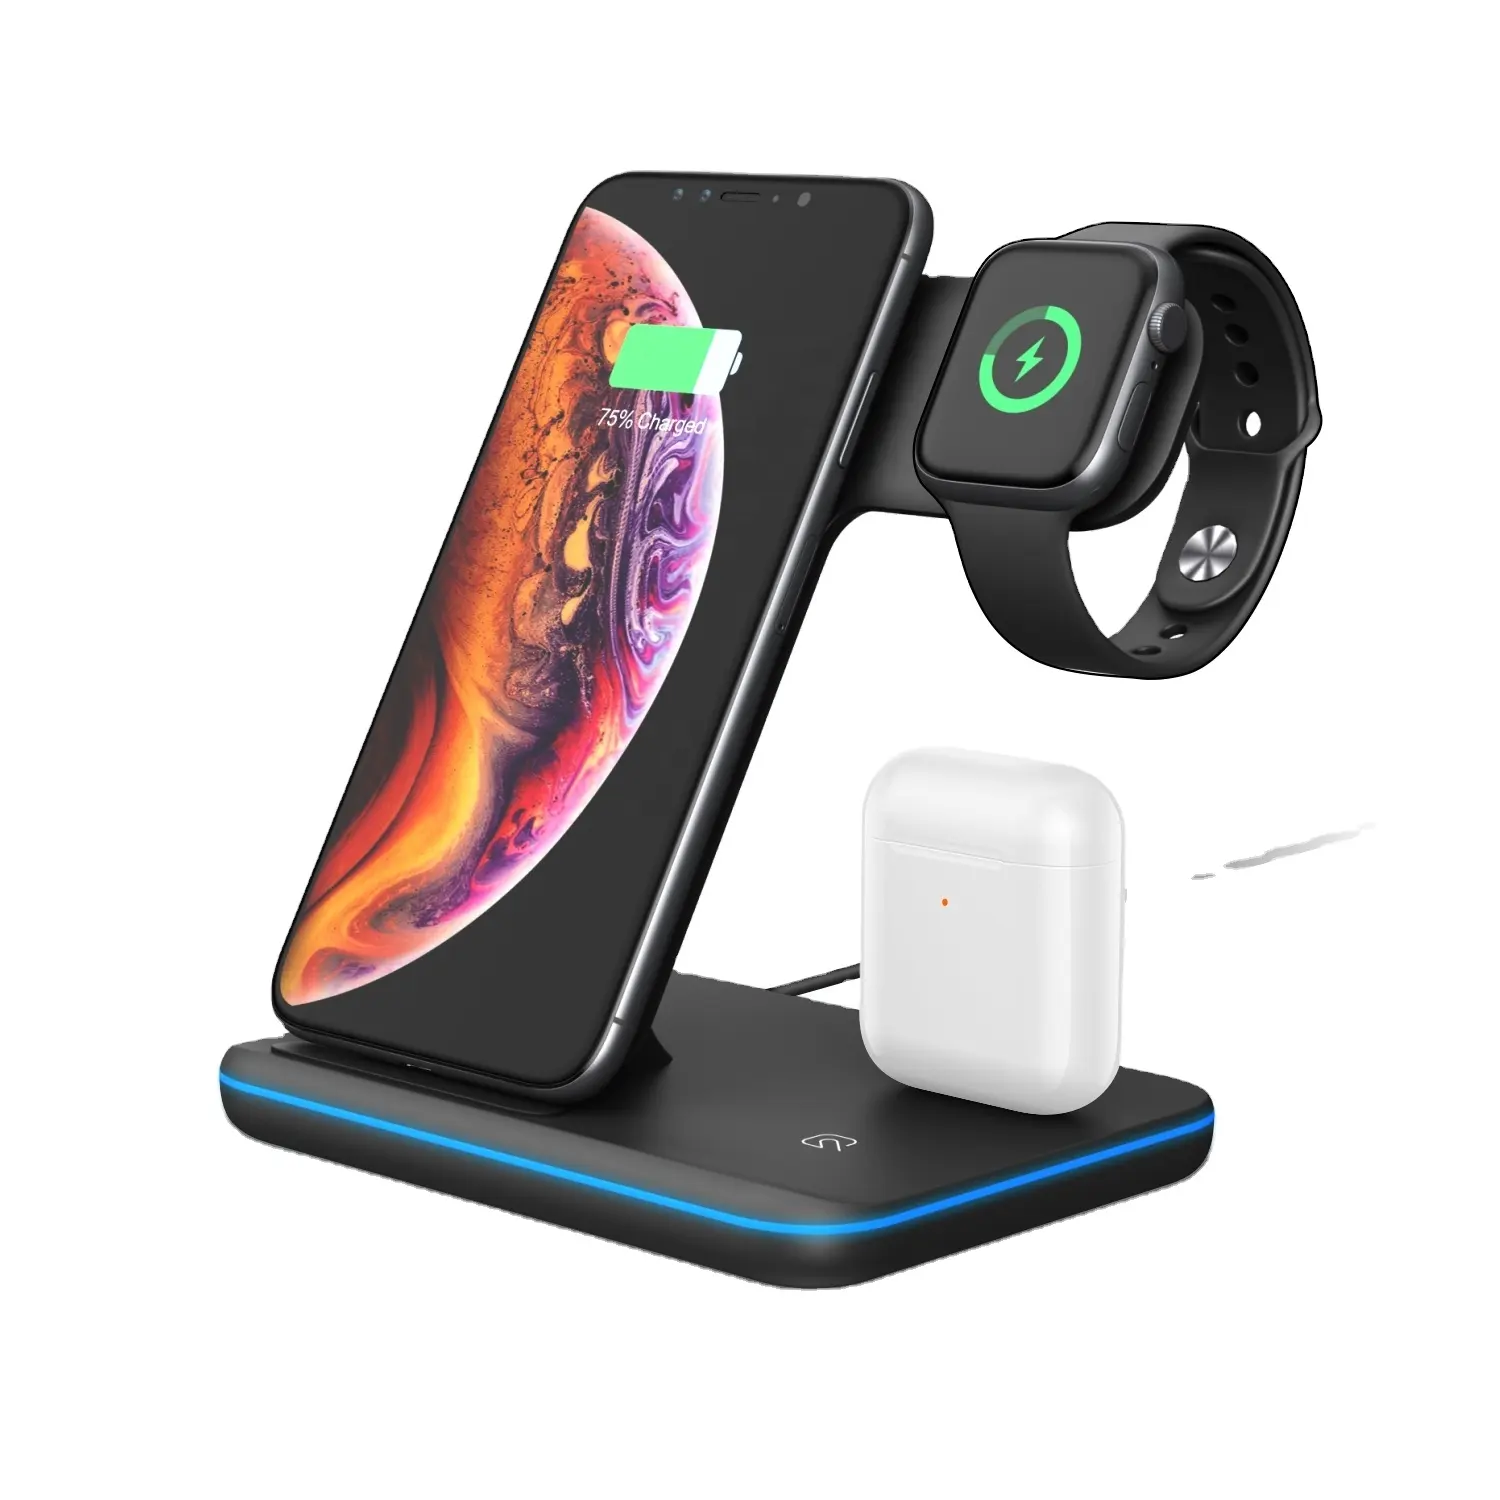 Hot販売3 1でWireless Charger Stand Fast Charging Cell Phone Holder Multi機能Wireless Charger電話腕時計イヤホン